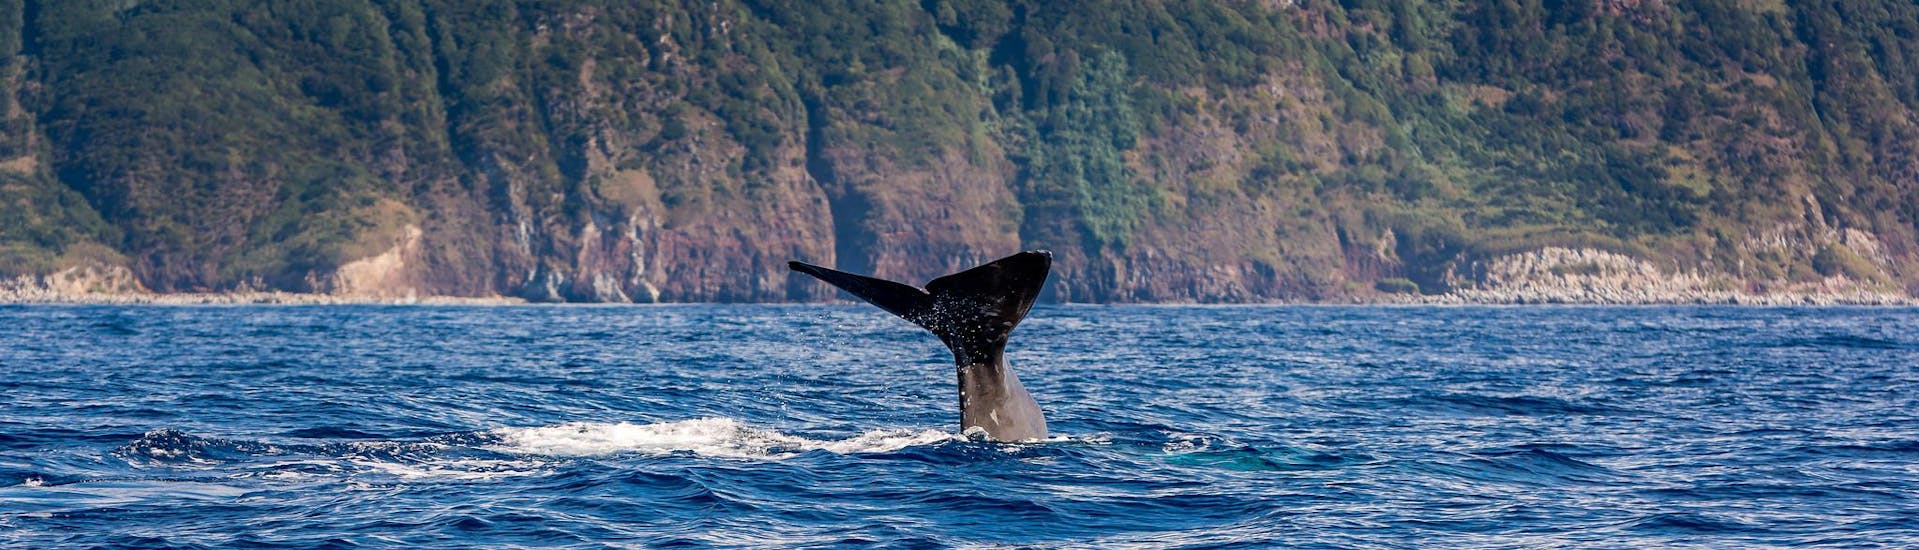 A whale tail spotted by people taking a boat trip with whale watching.